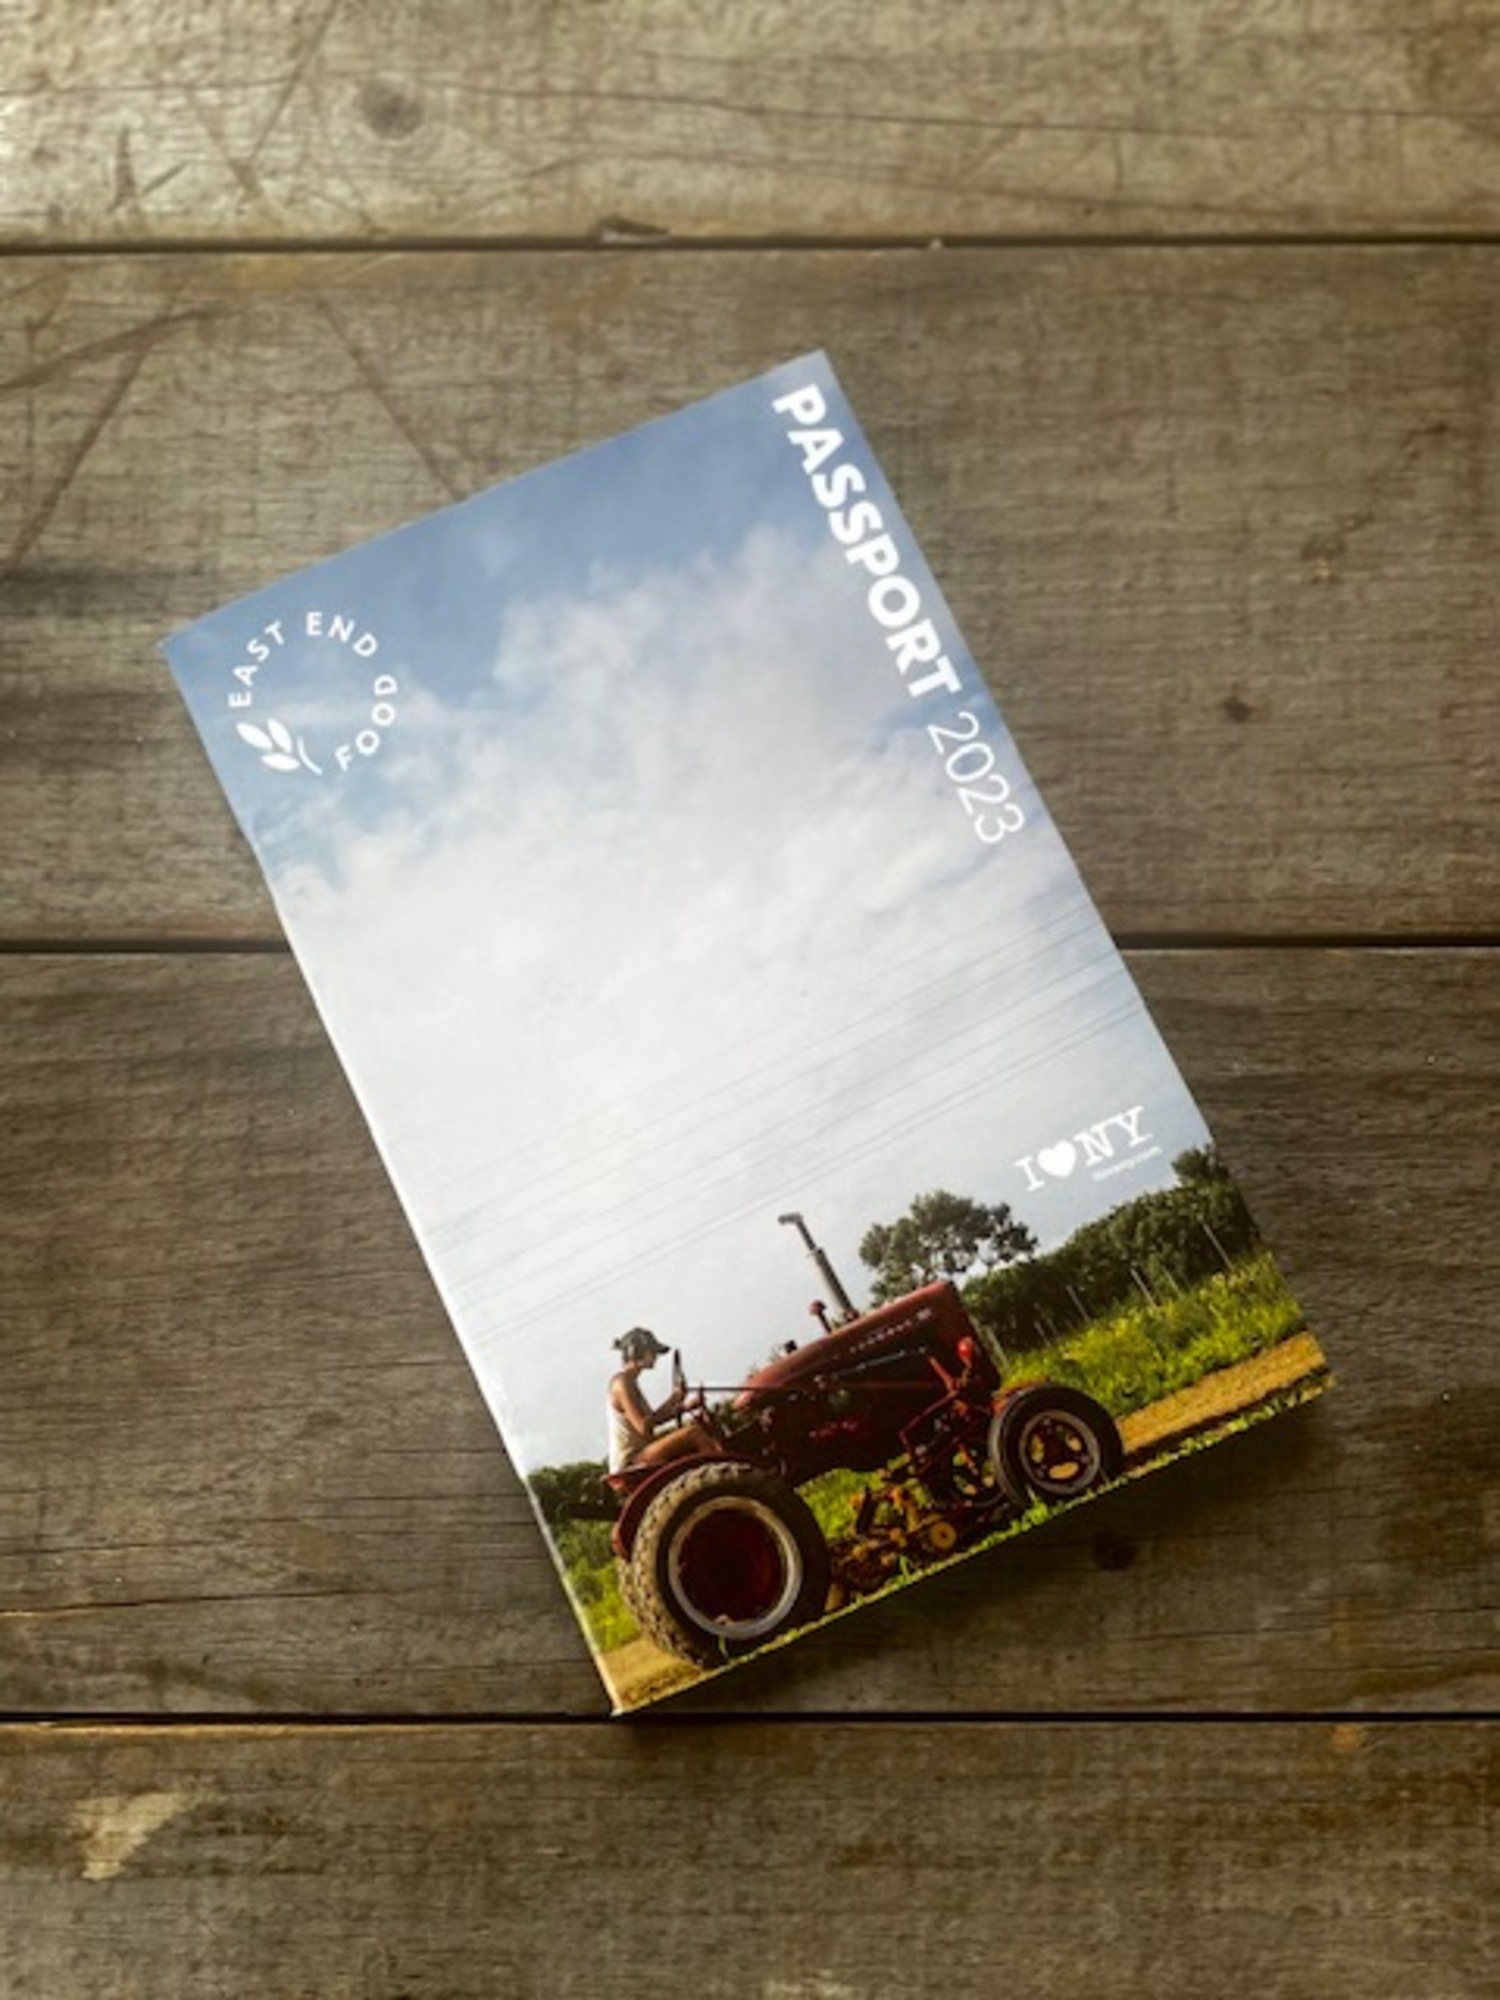 East End Food Passport features a directory of 160 farm, food and craft businesses in the area. COURTESY EAST END FOOD